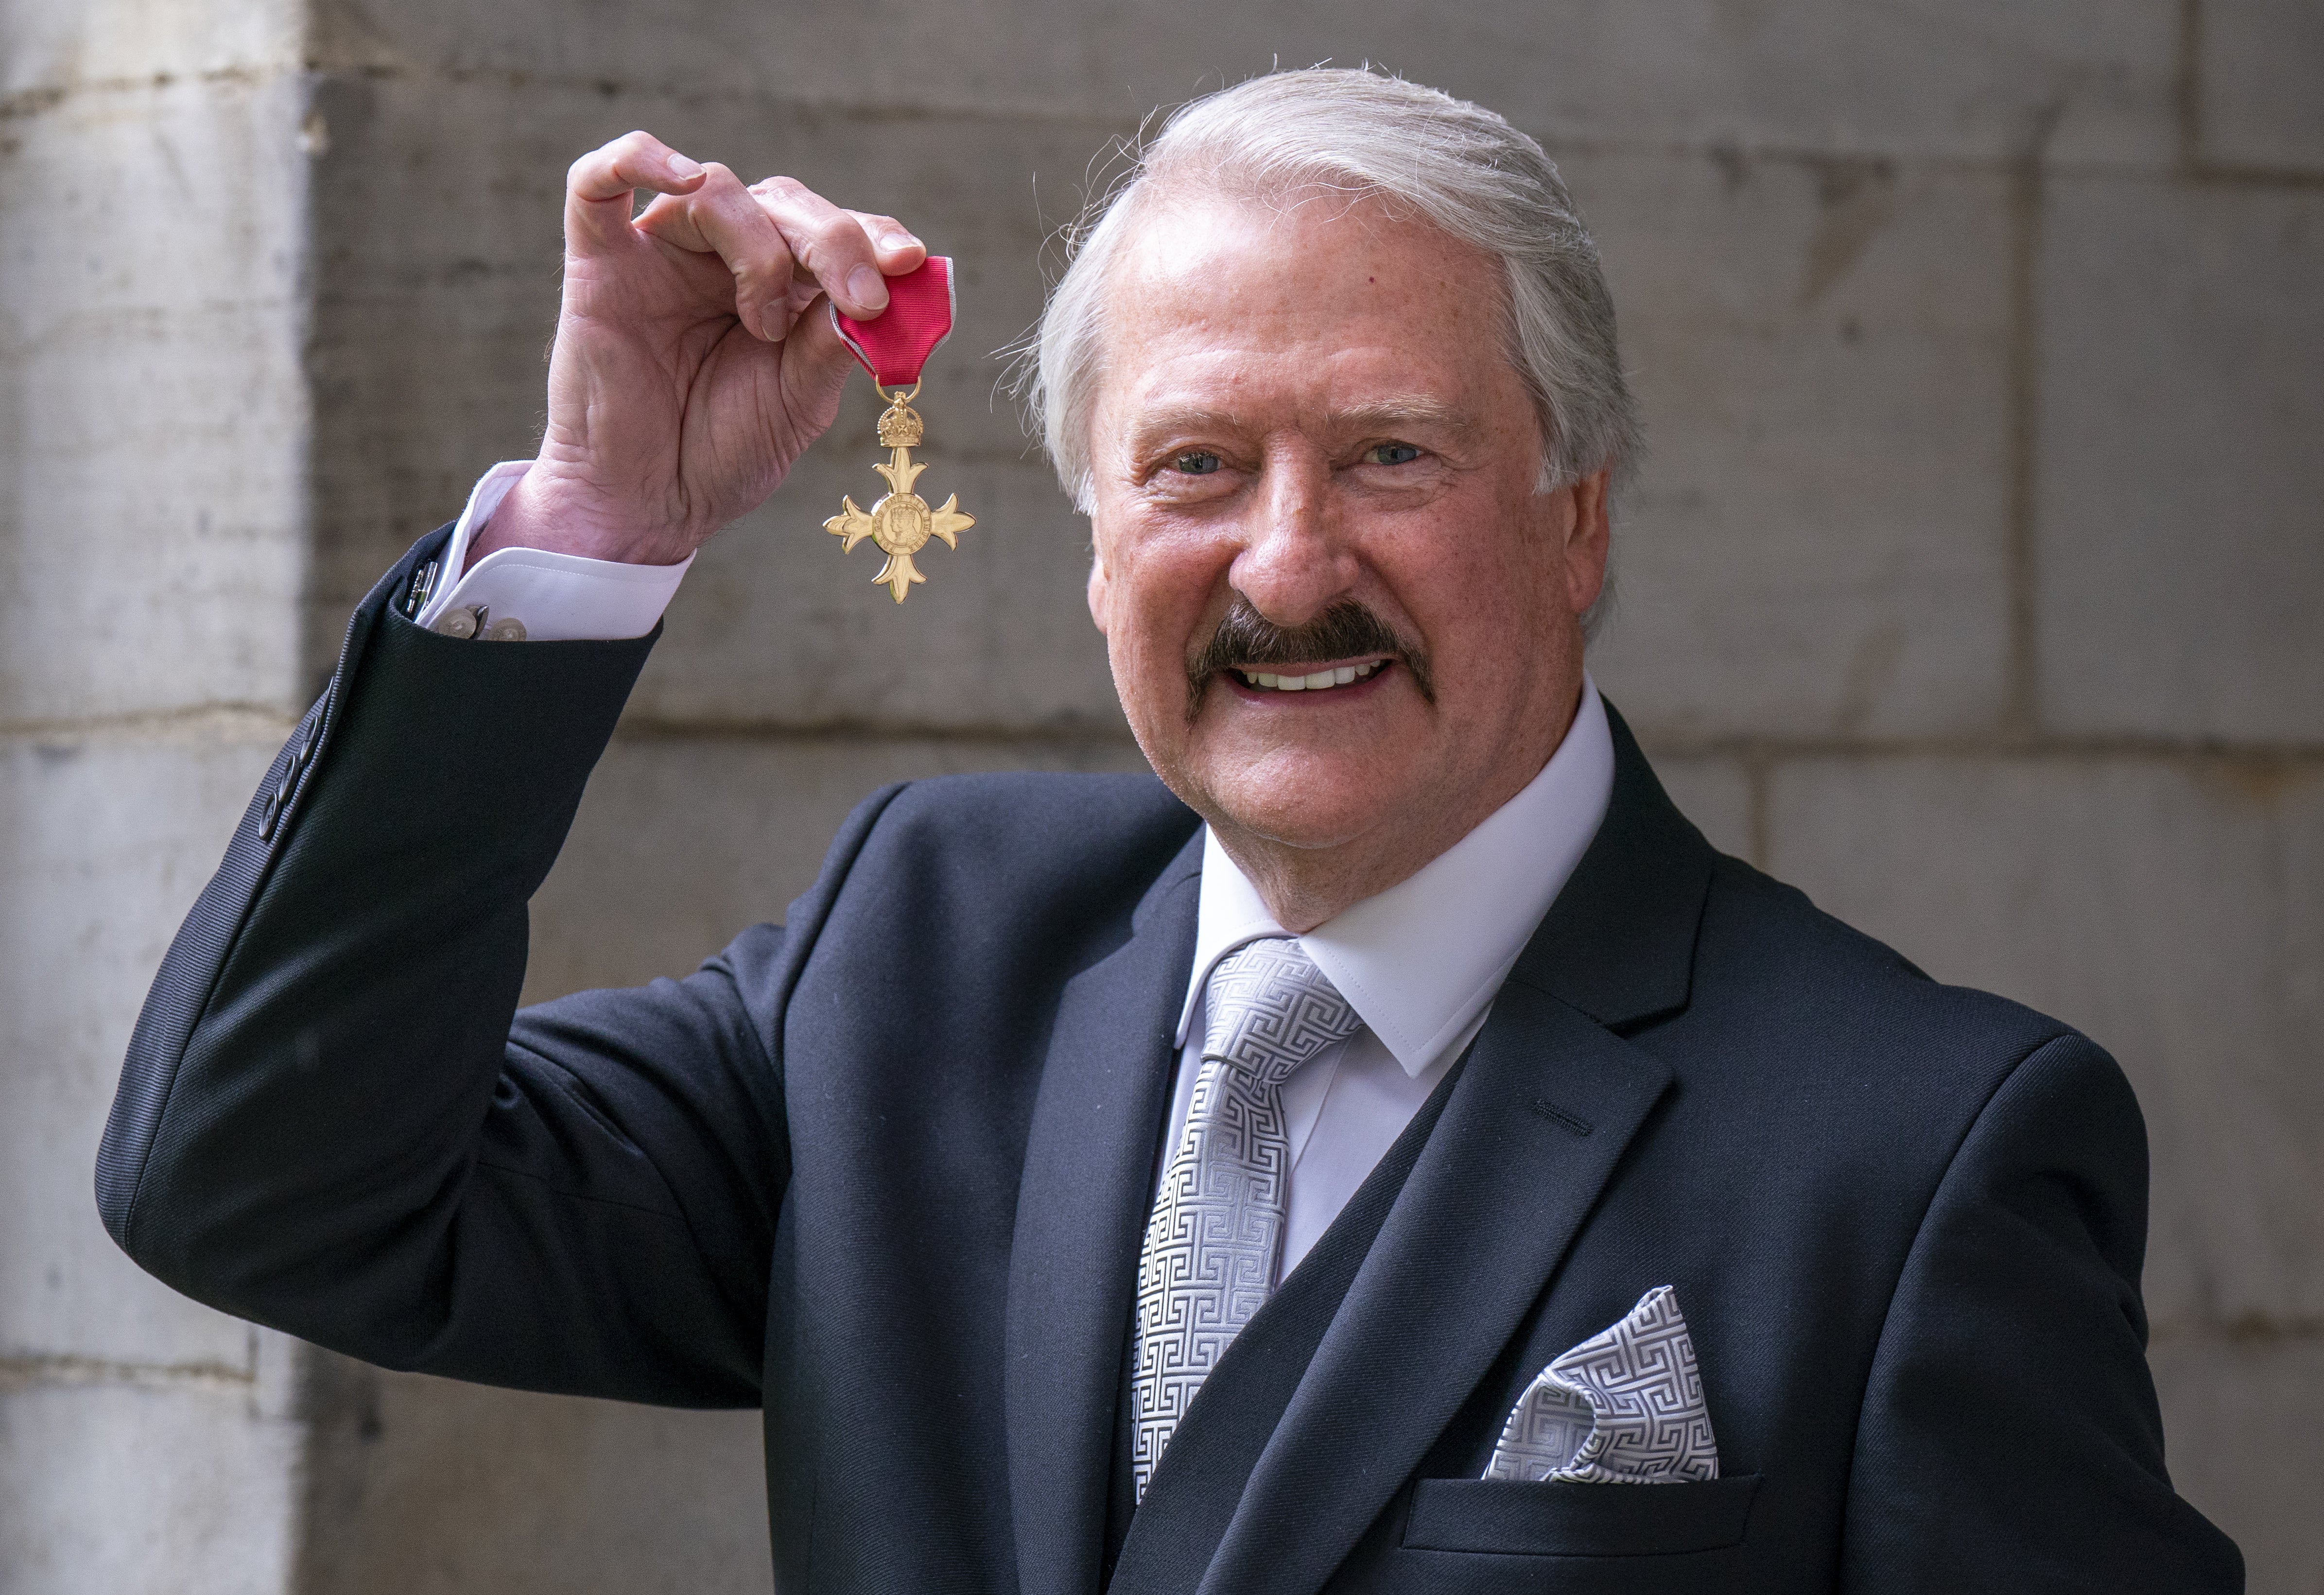 Richard Paterson at the investiture ceremony at the Palace of Holyrood House (Jane Barlow/PA)